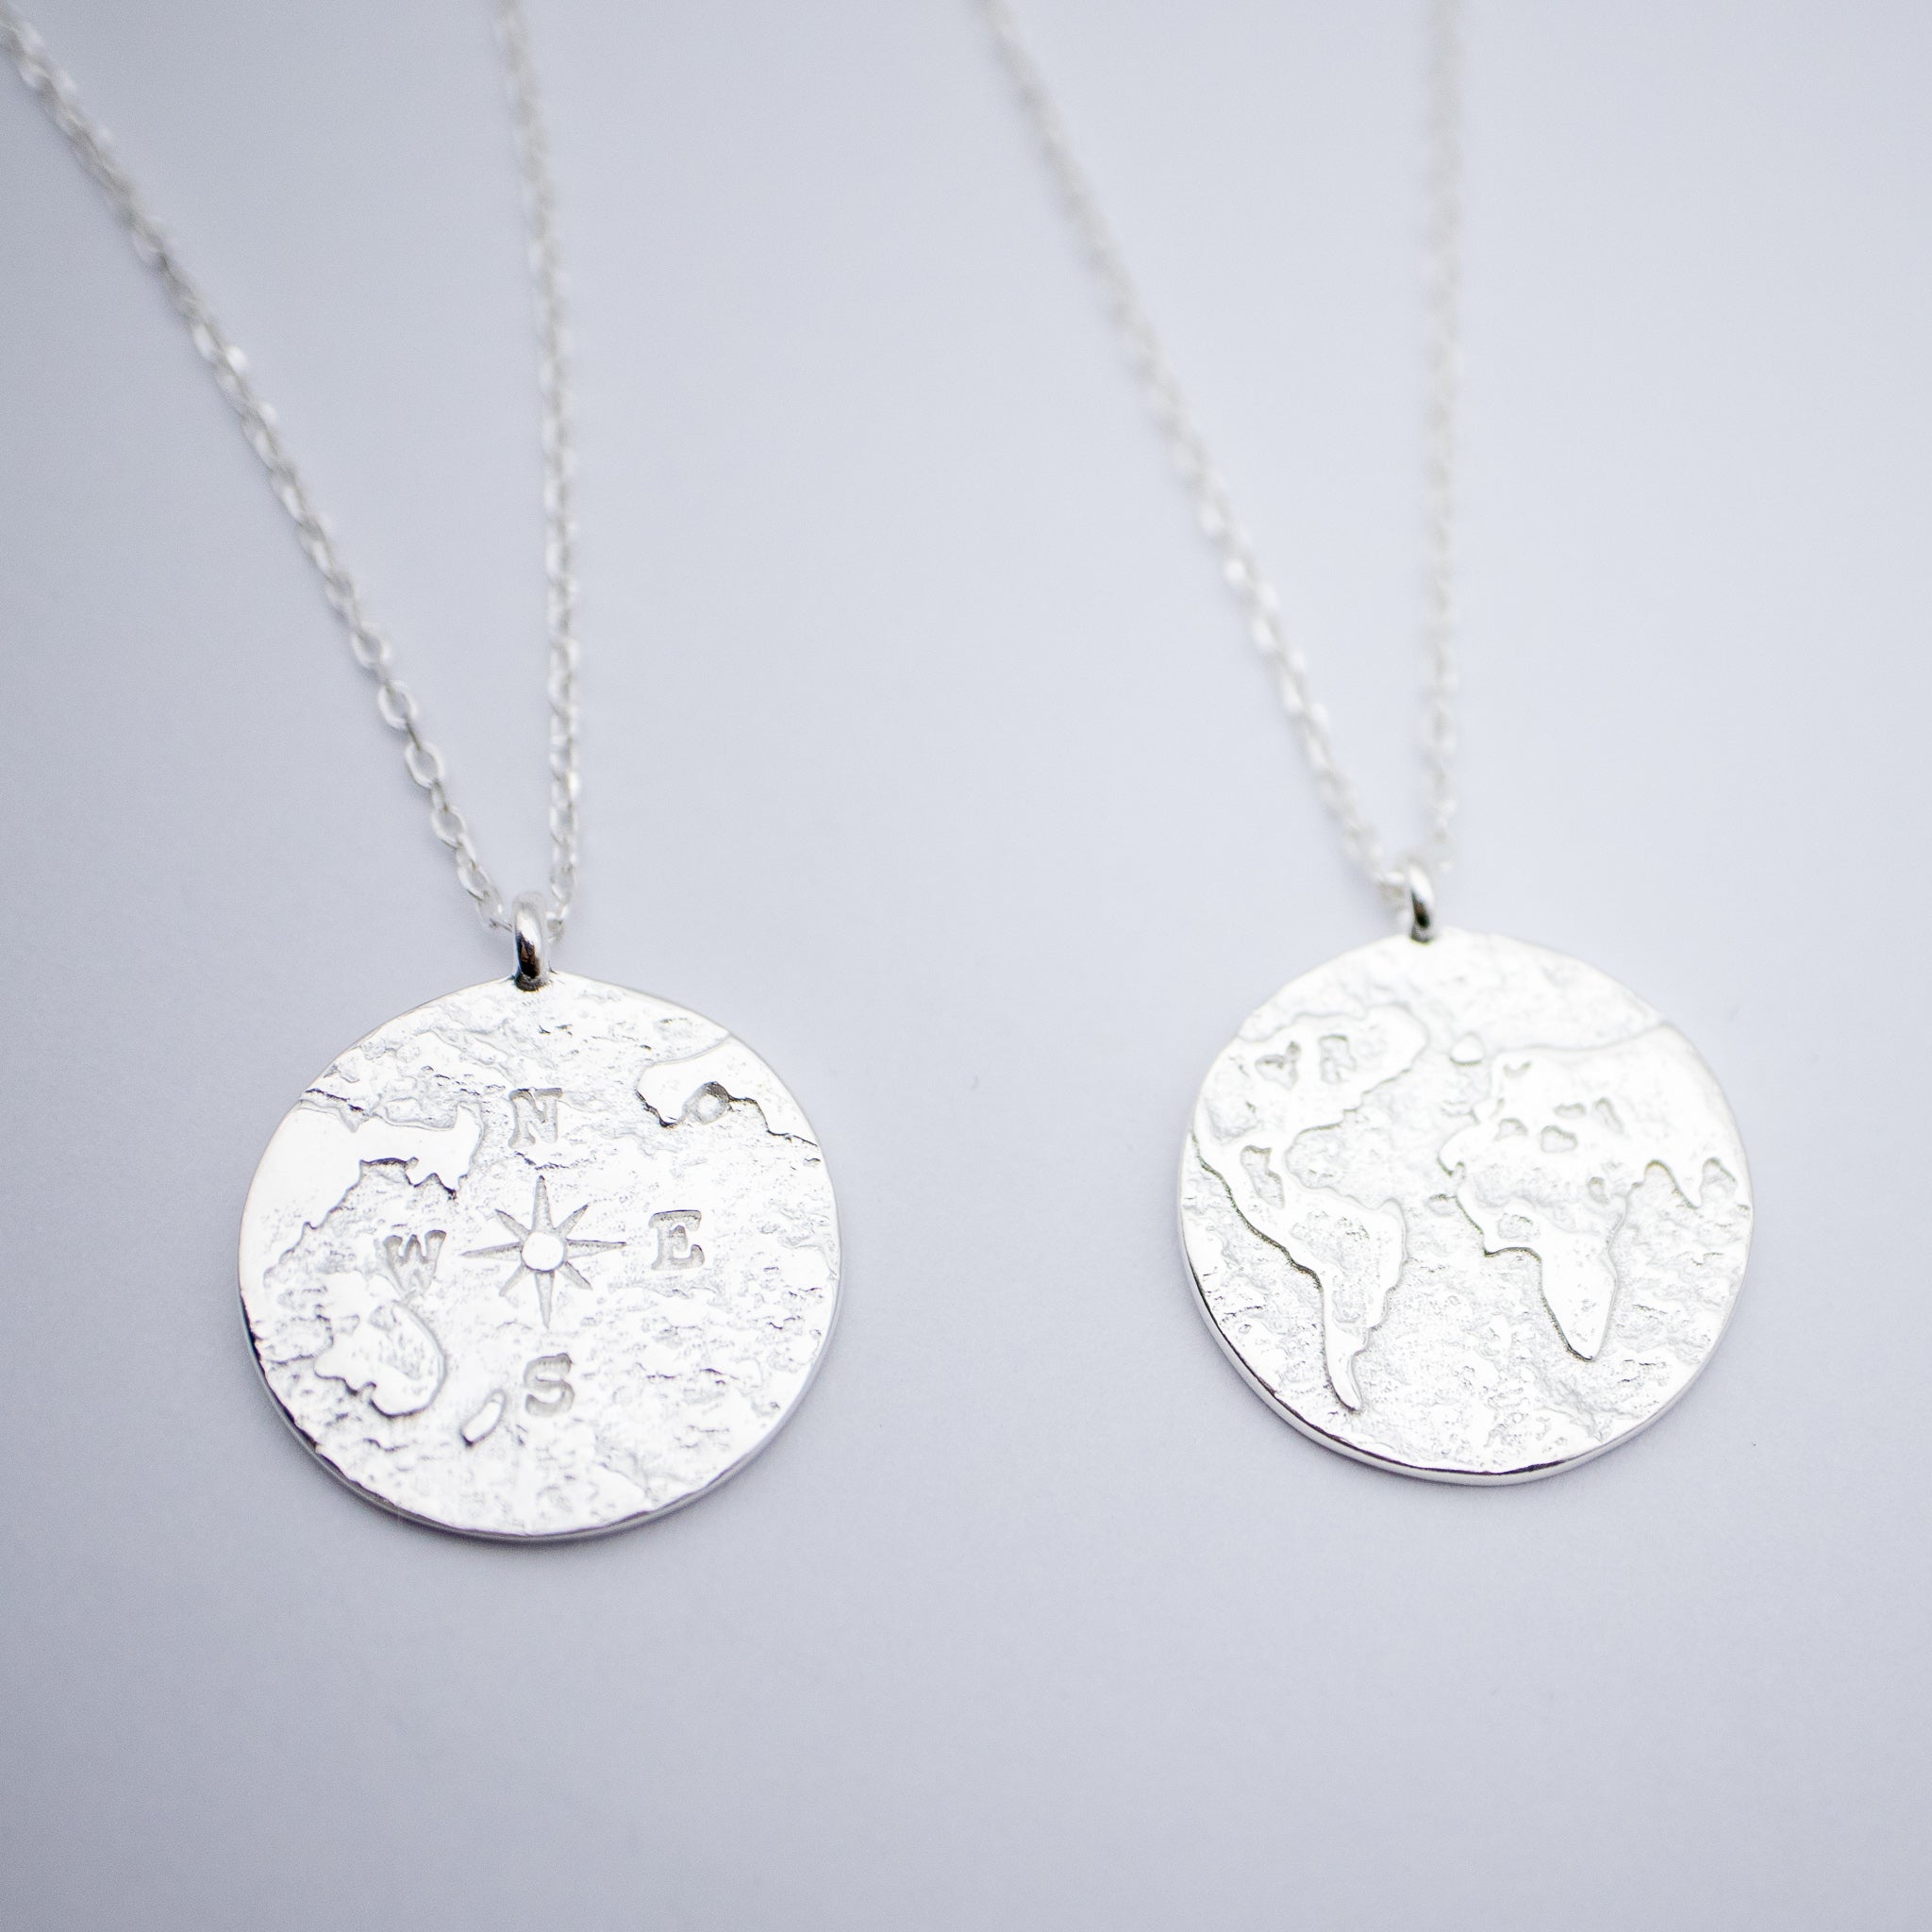 Map Double Face Necklace